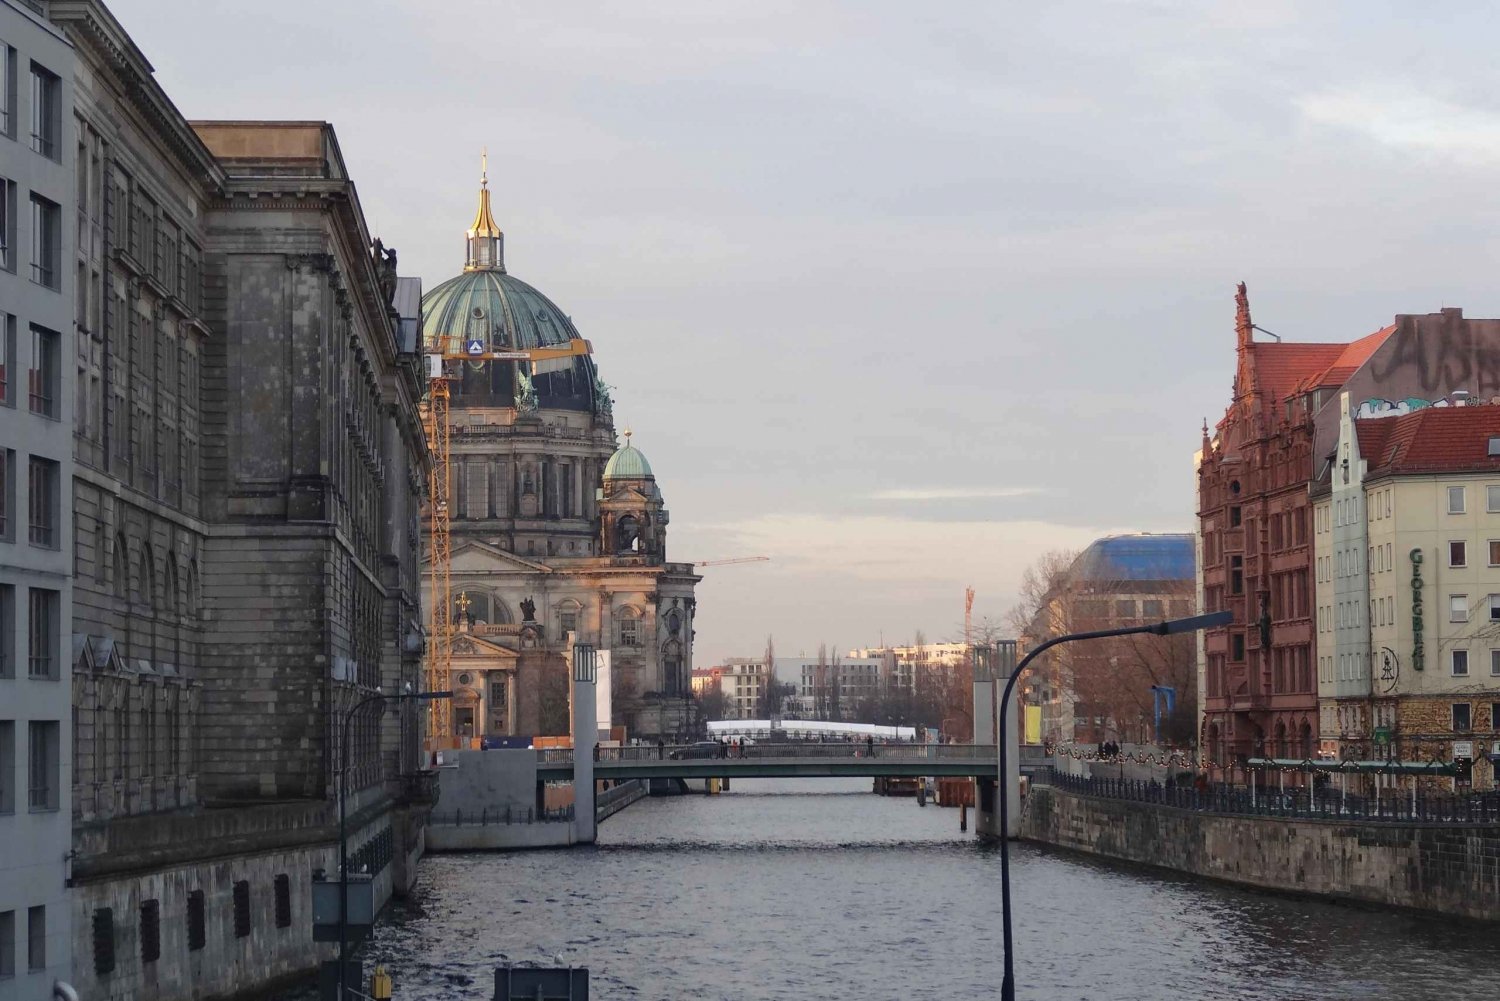 Essential Berlin Private Tour Landmarks Highlights & History